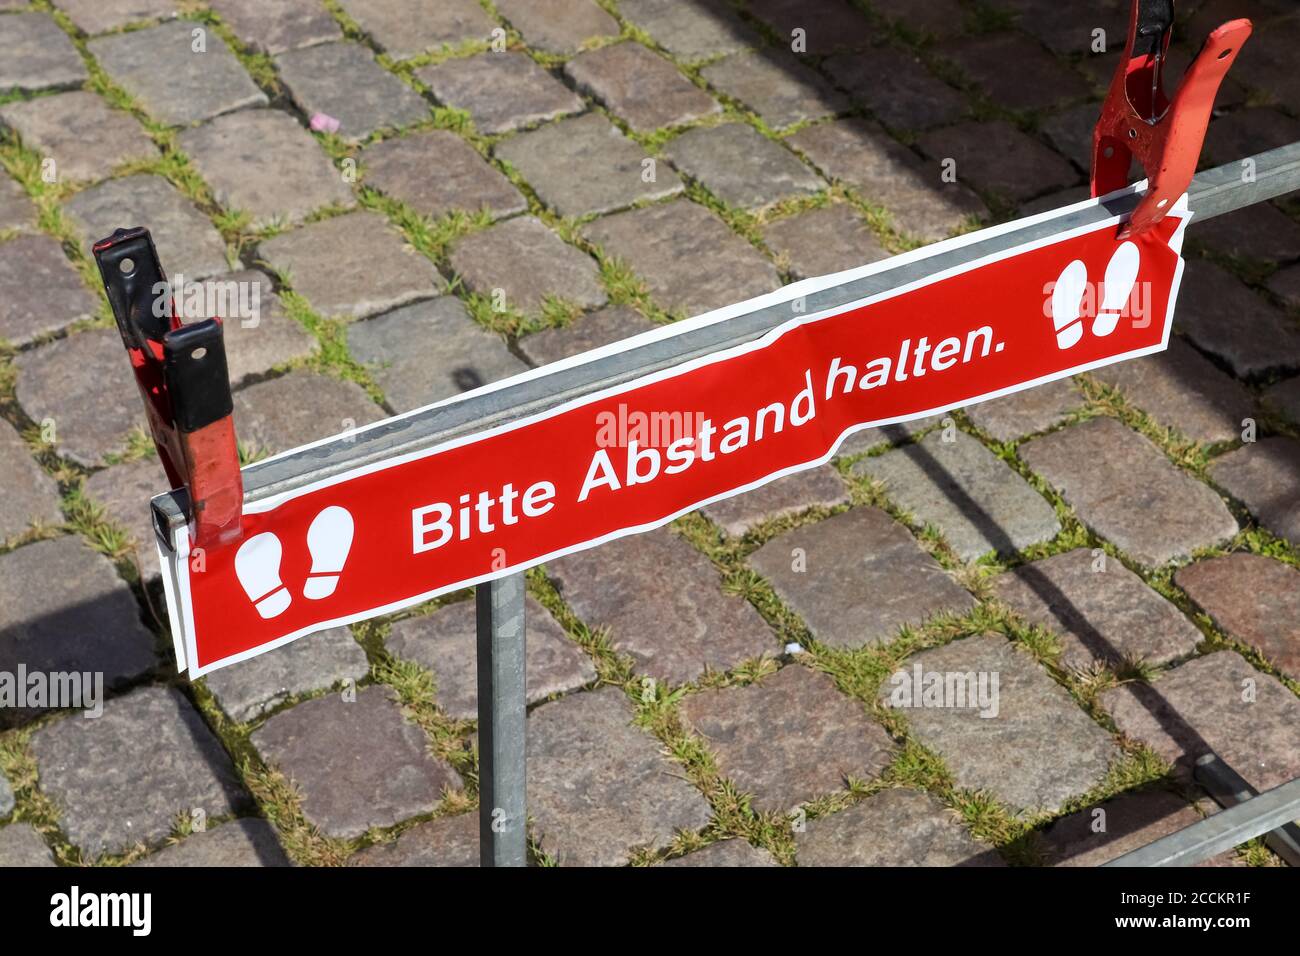 Bitte Abstand Halten! 1.5 meter social distancing sign for COVID-19. Keep distance symbol in german language Stock Photo